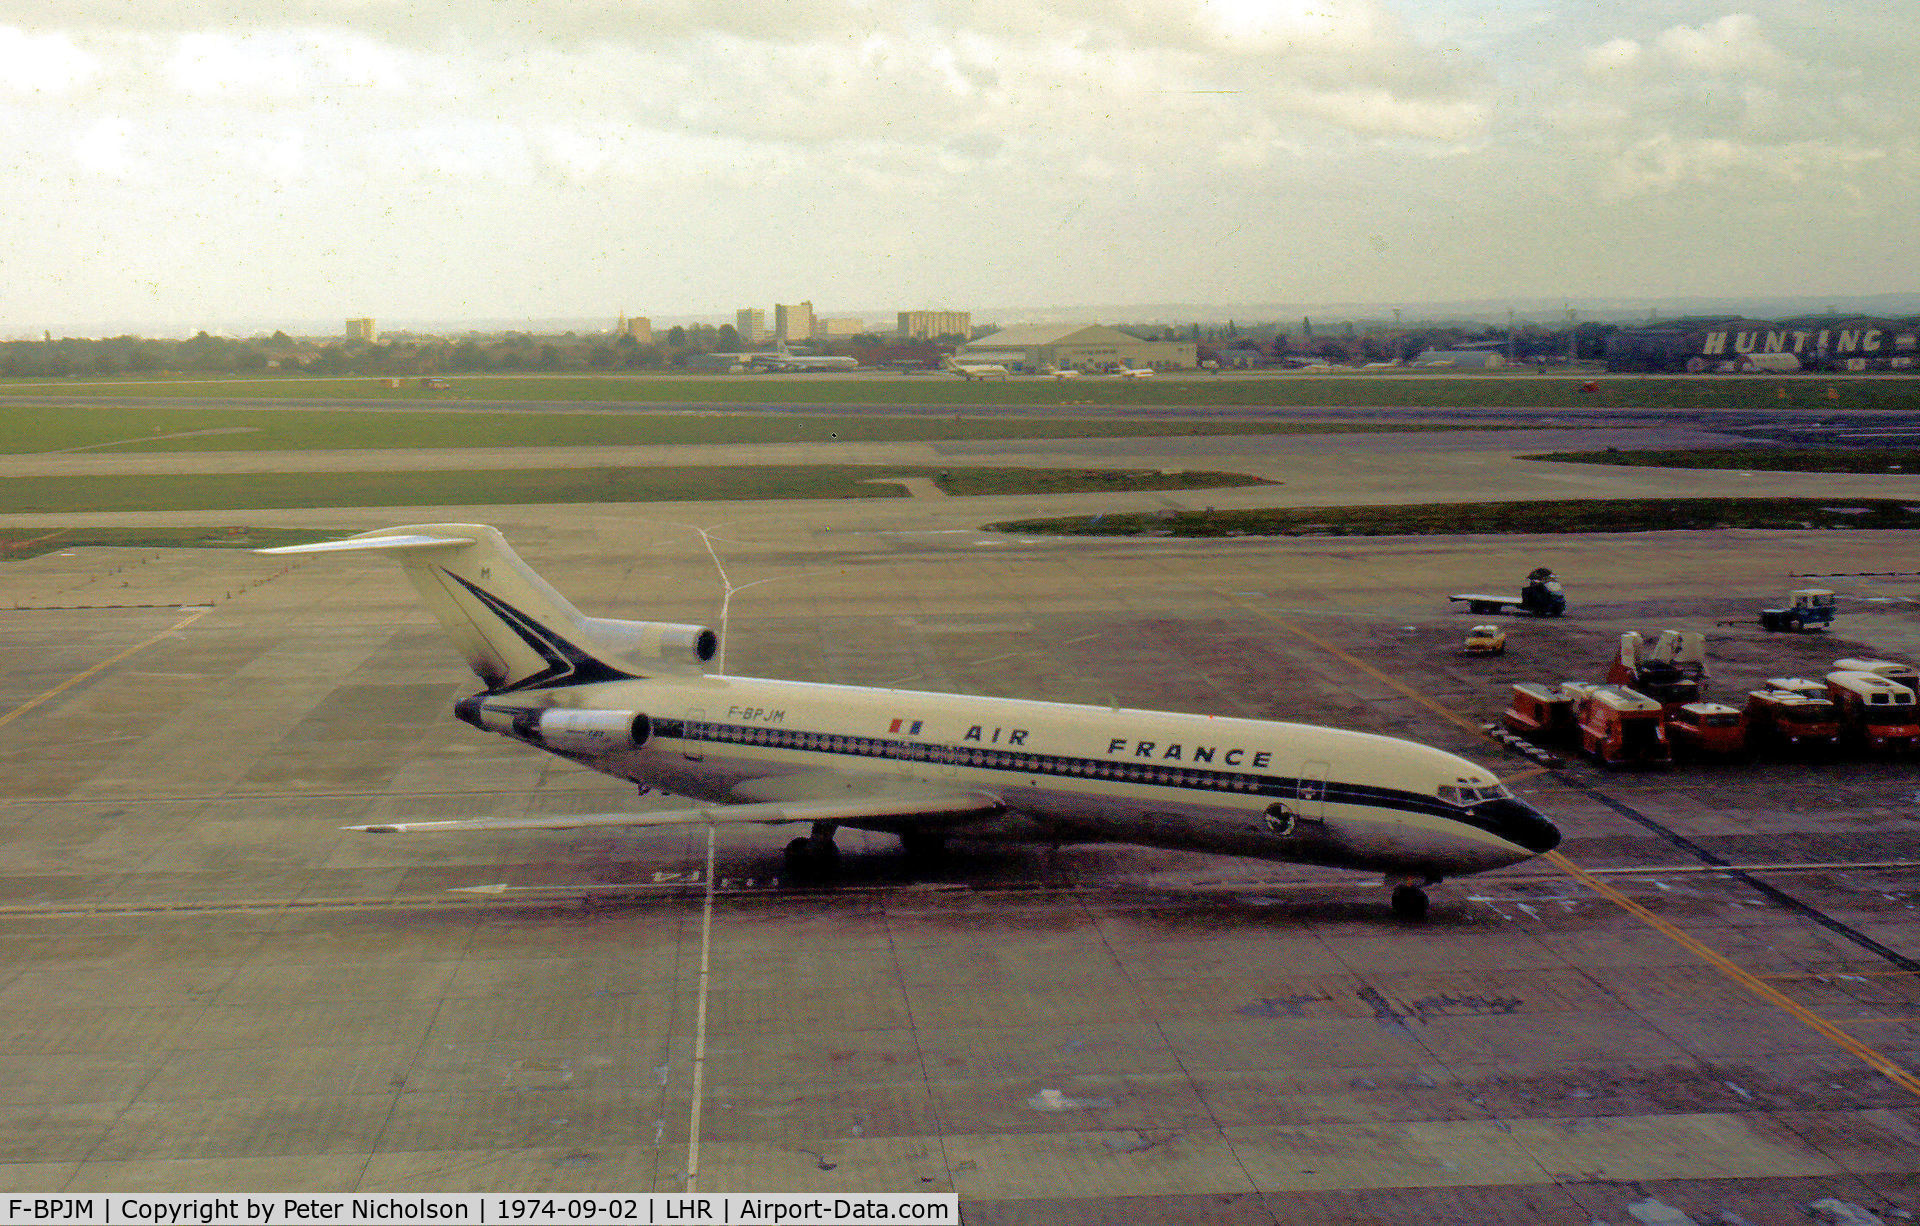 F-BPJM, 1969 Boeing 727-228 C/N 20204, Boeing 727-228 of A ir France as seen at Heathrow in the Summer of 1974.